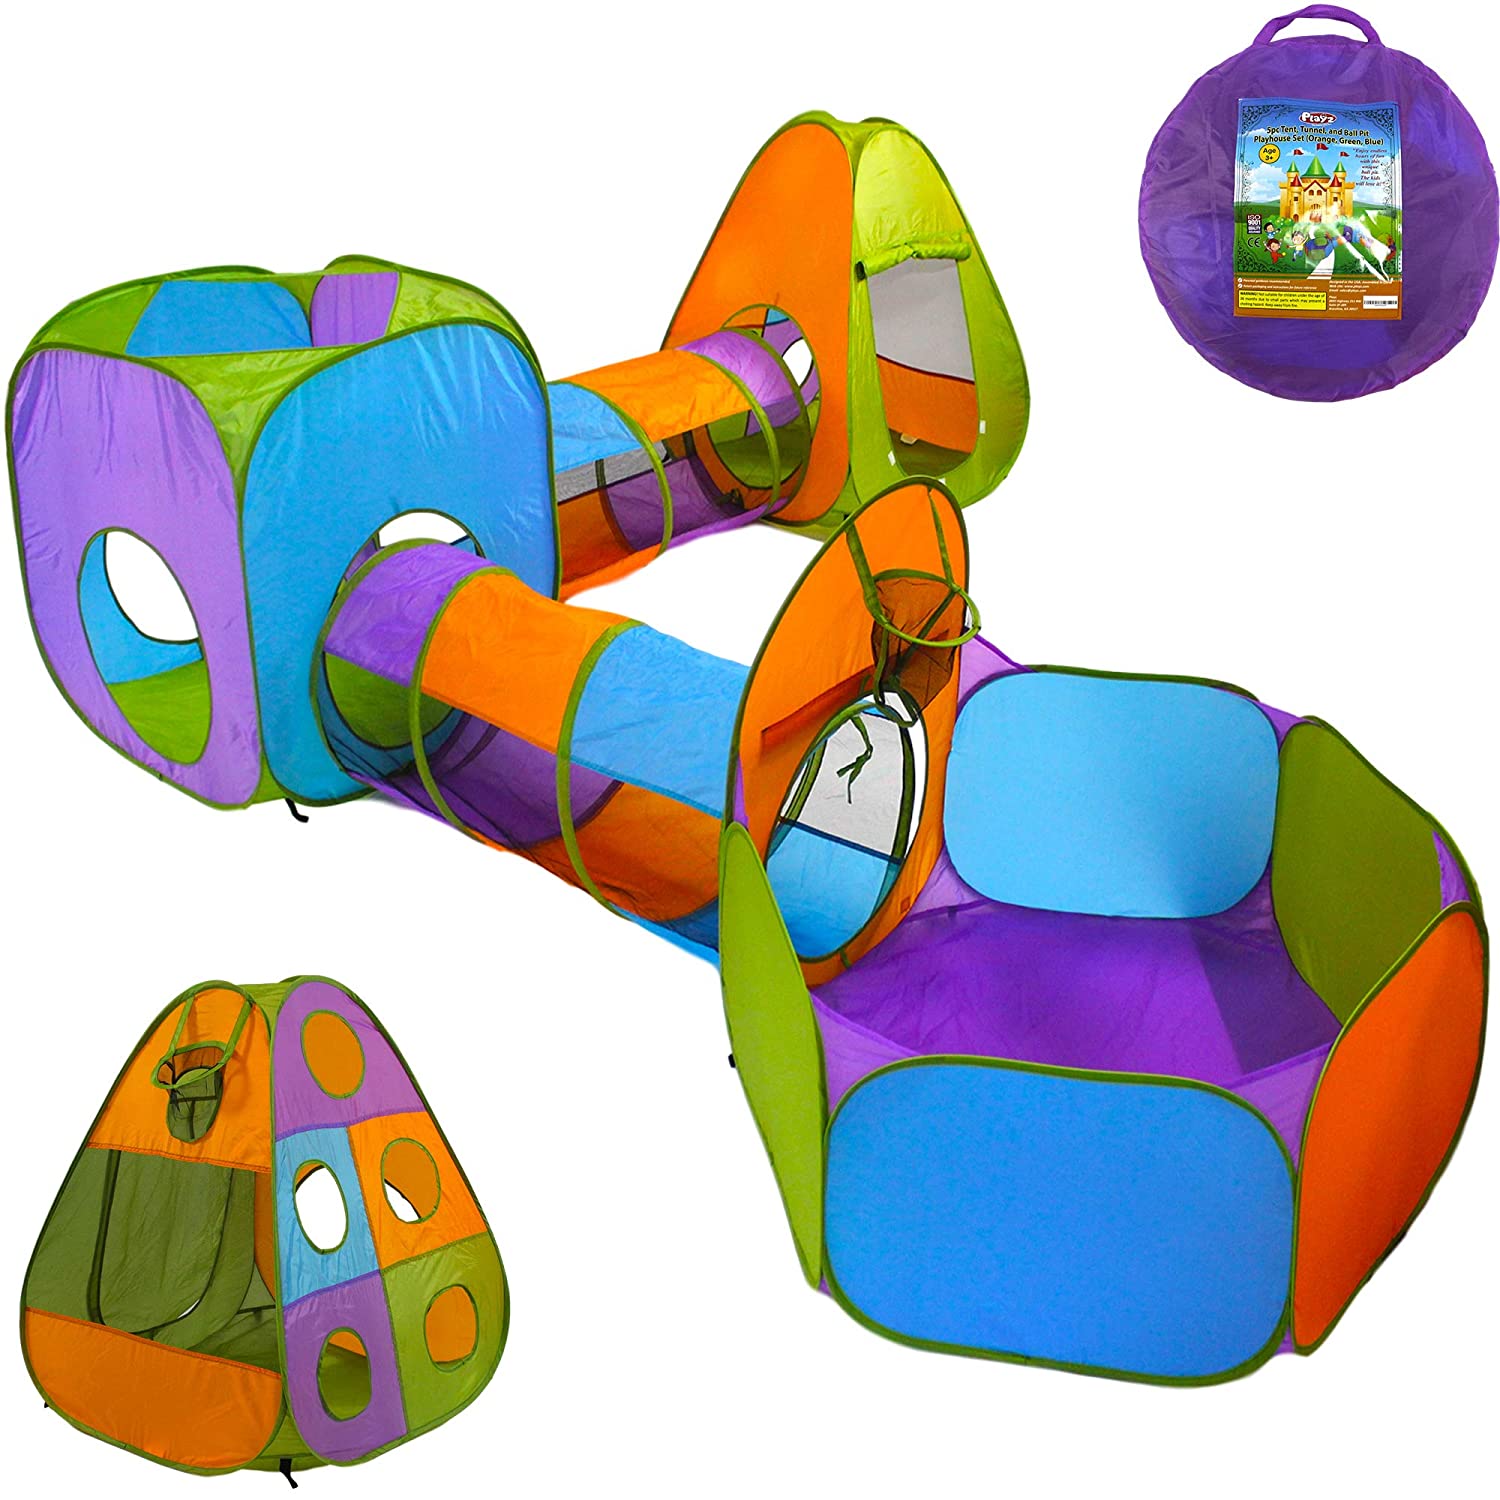 7 Best Crawling Tunnels for Toddlers 2022 - Buying Guide 2